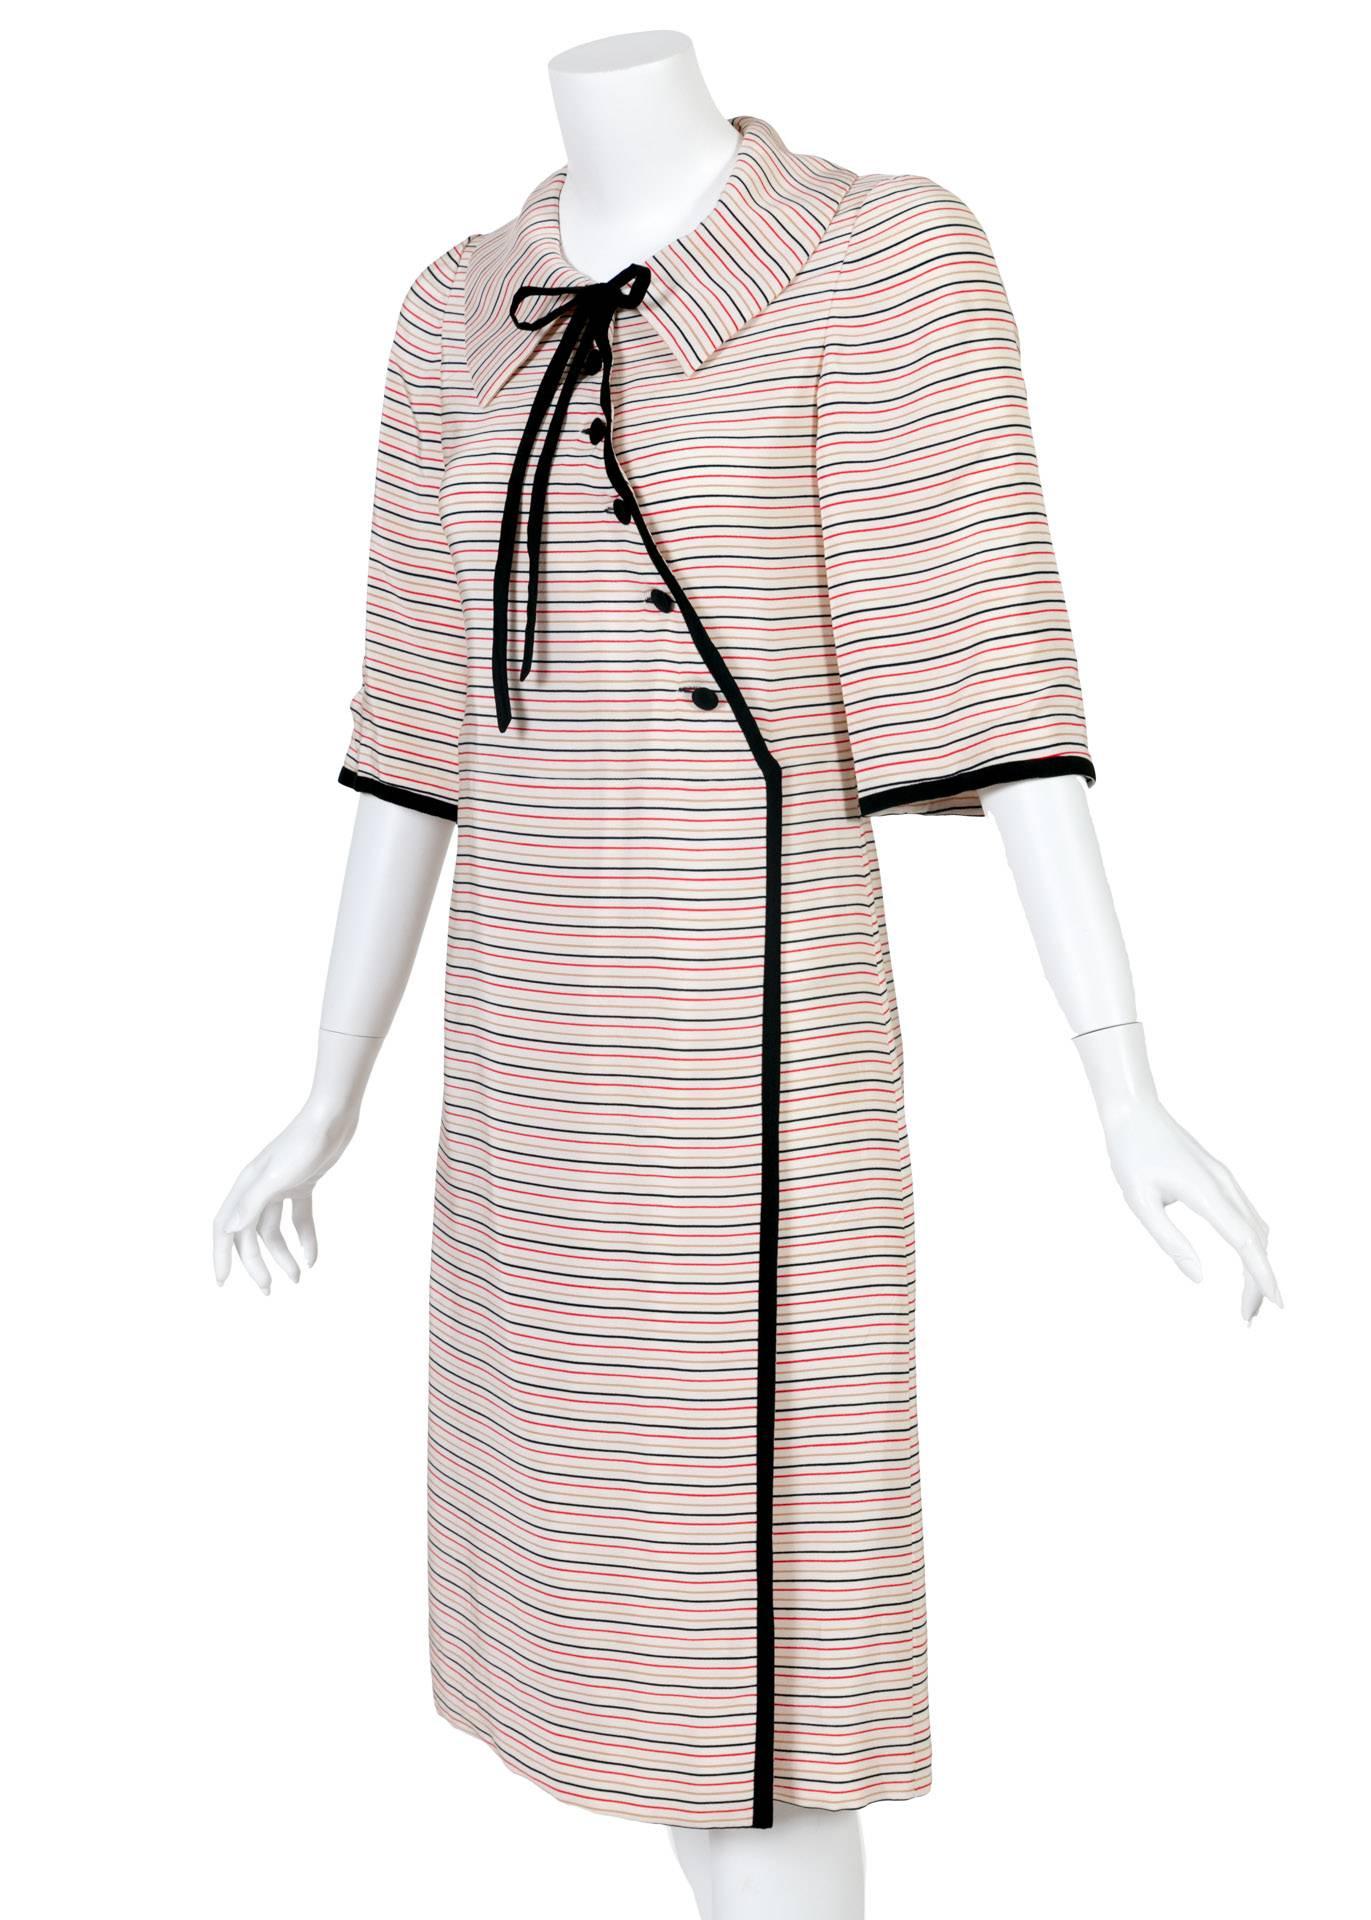 Tiziani Roma, an Italian fashion label founded in 1963, was fortunate to have the fresh and adept skills of Karl Lagerfeld. Designed at the beginning of his career, this mod 1960s dress is a stunning example of Lagerfeld’s prowess. Made from an